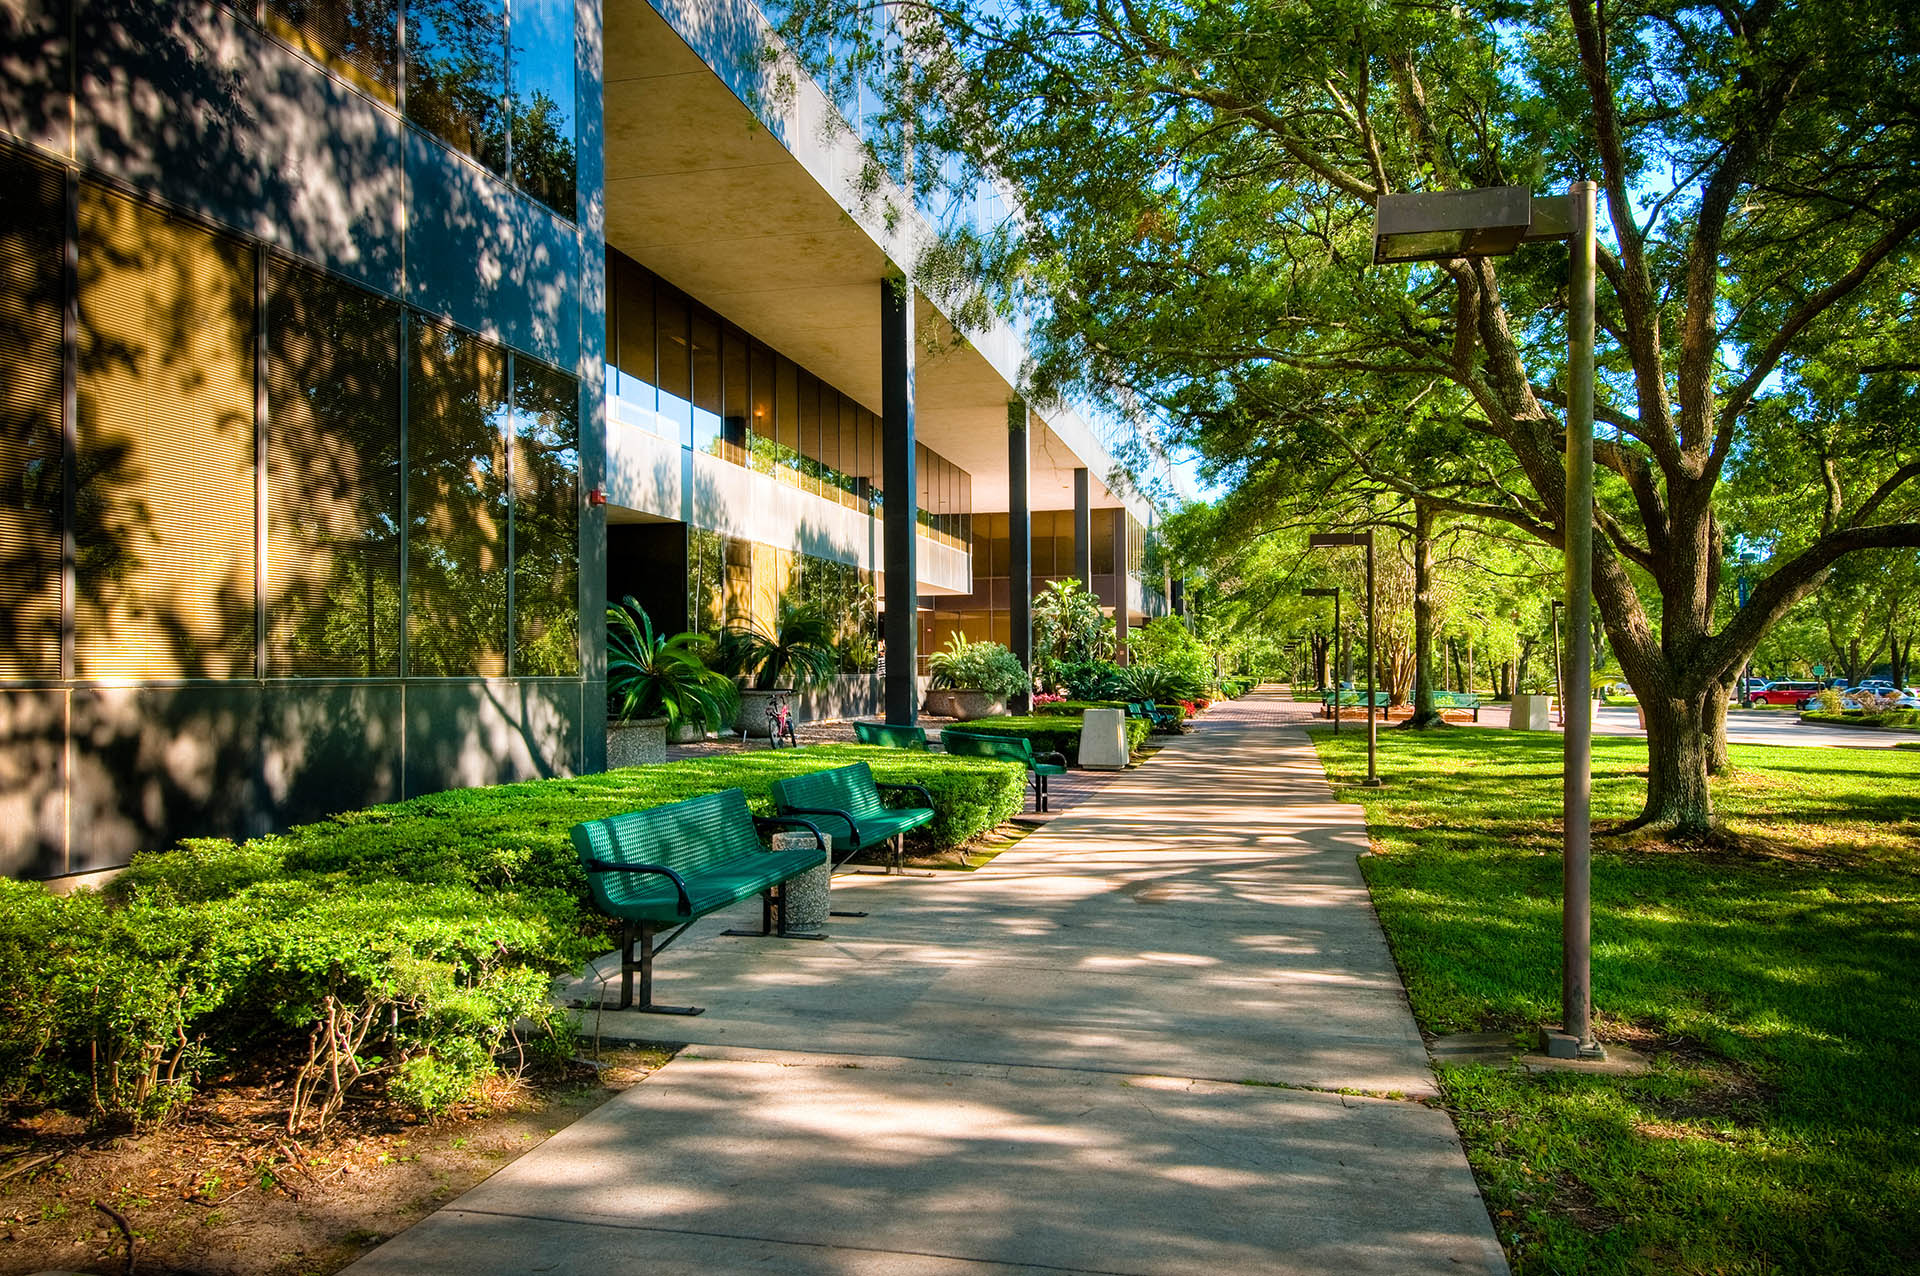  A sun-dappled view of the Bayou Building and UHCL campus